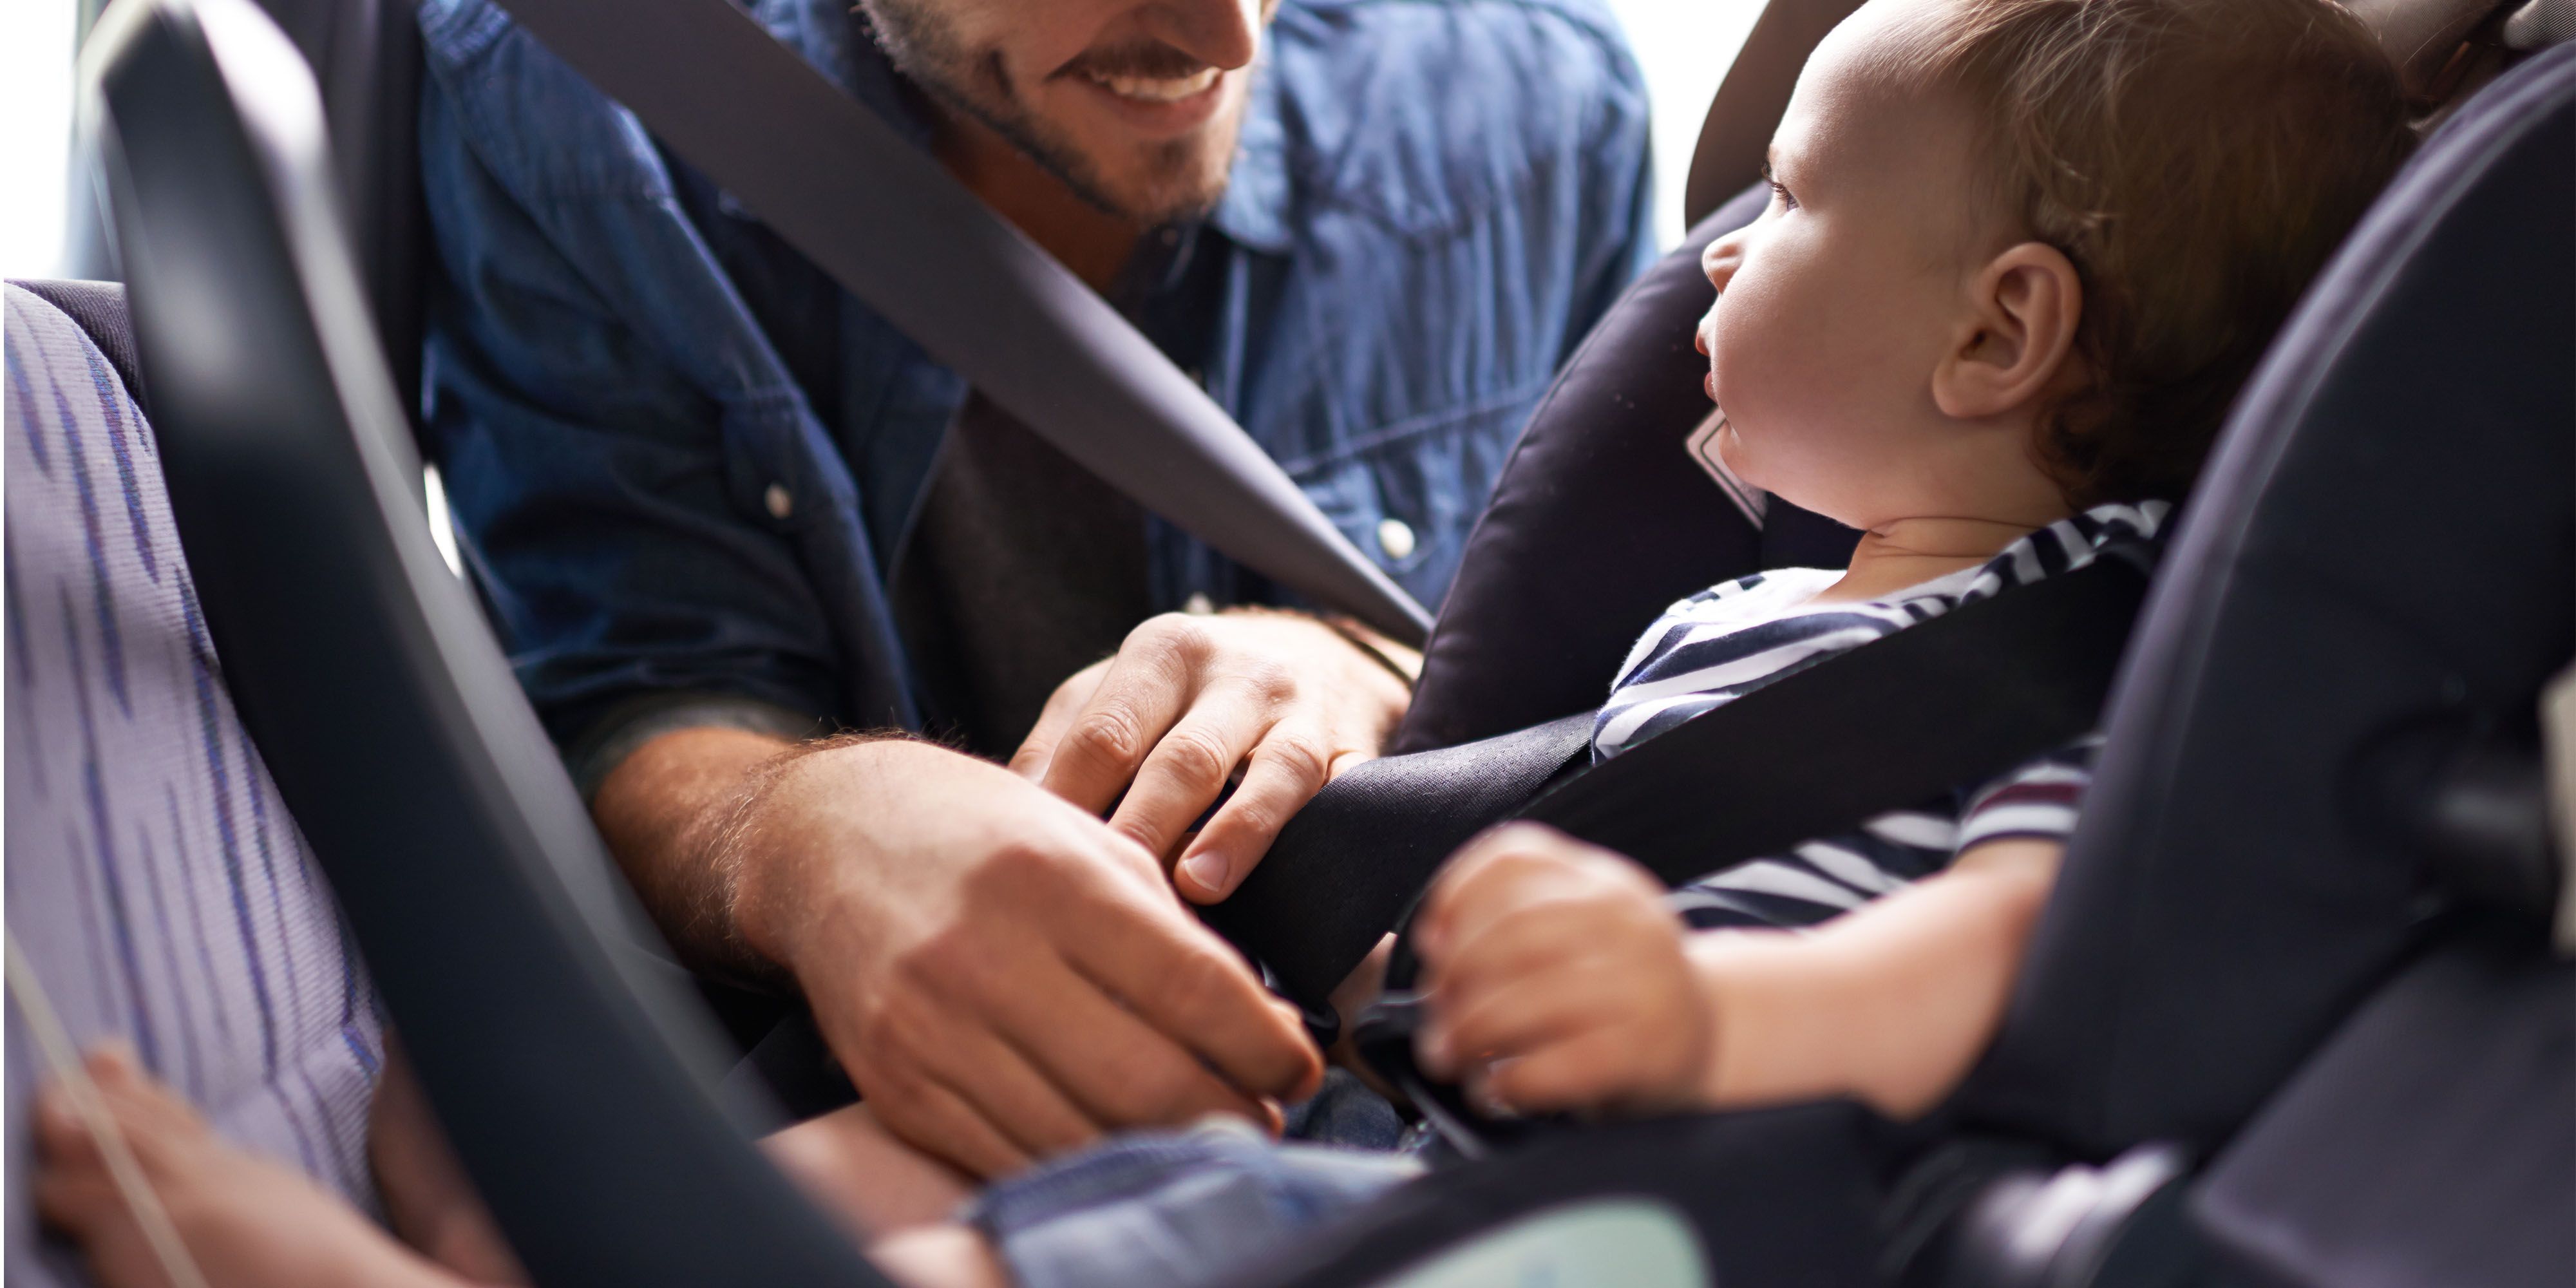 California Rear Facing Car Seat Law Kids Under Two Years Old In